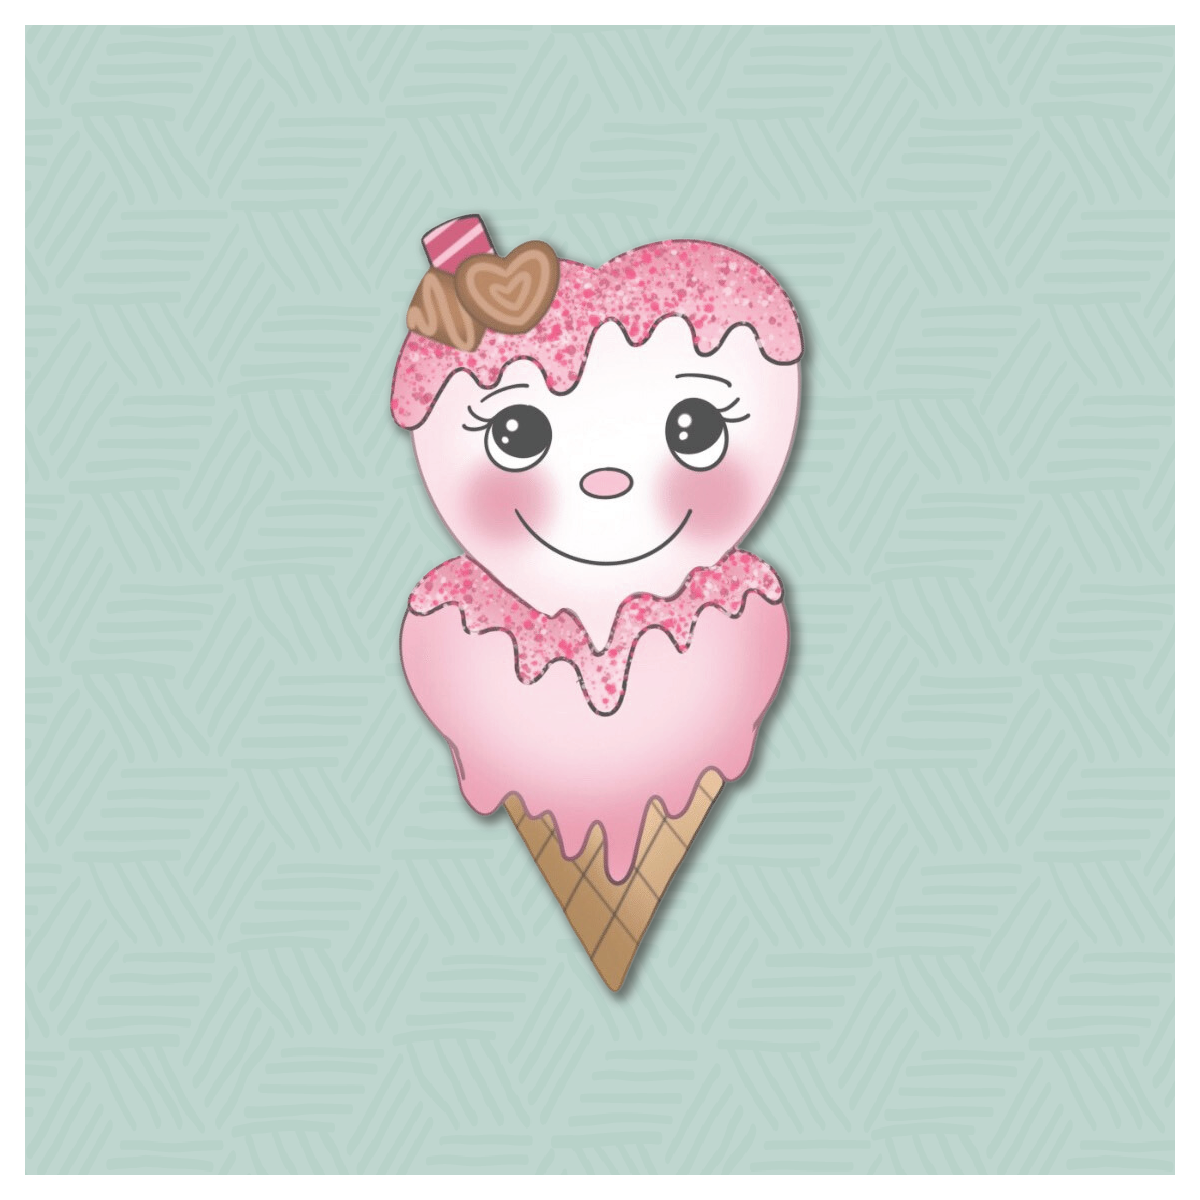 Heart Cone Cookie Cutter by MinnieCakes